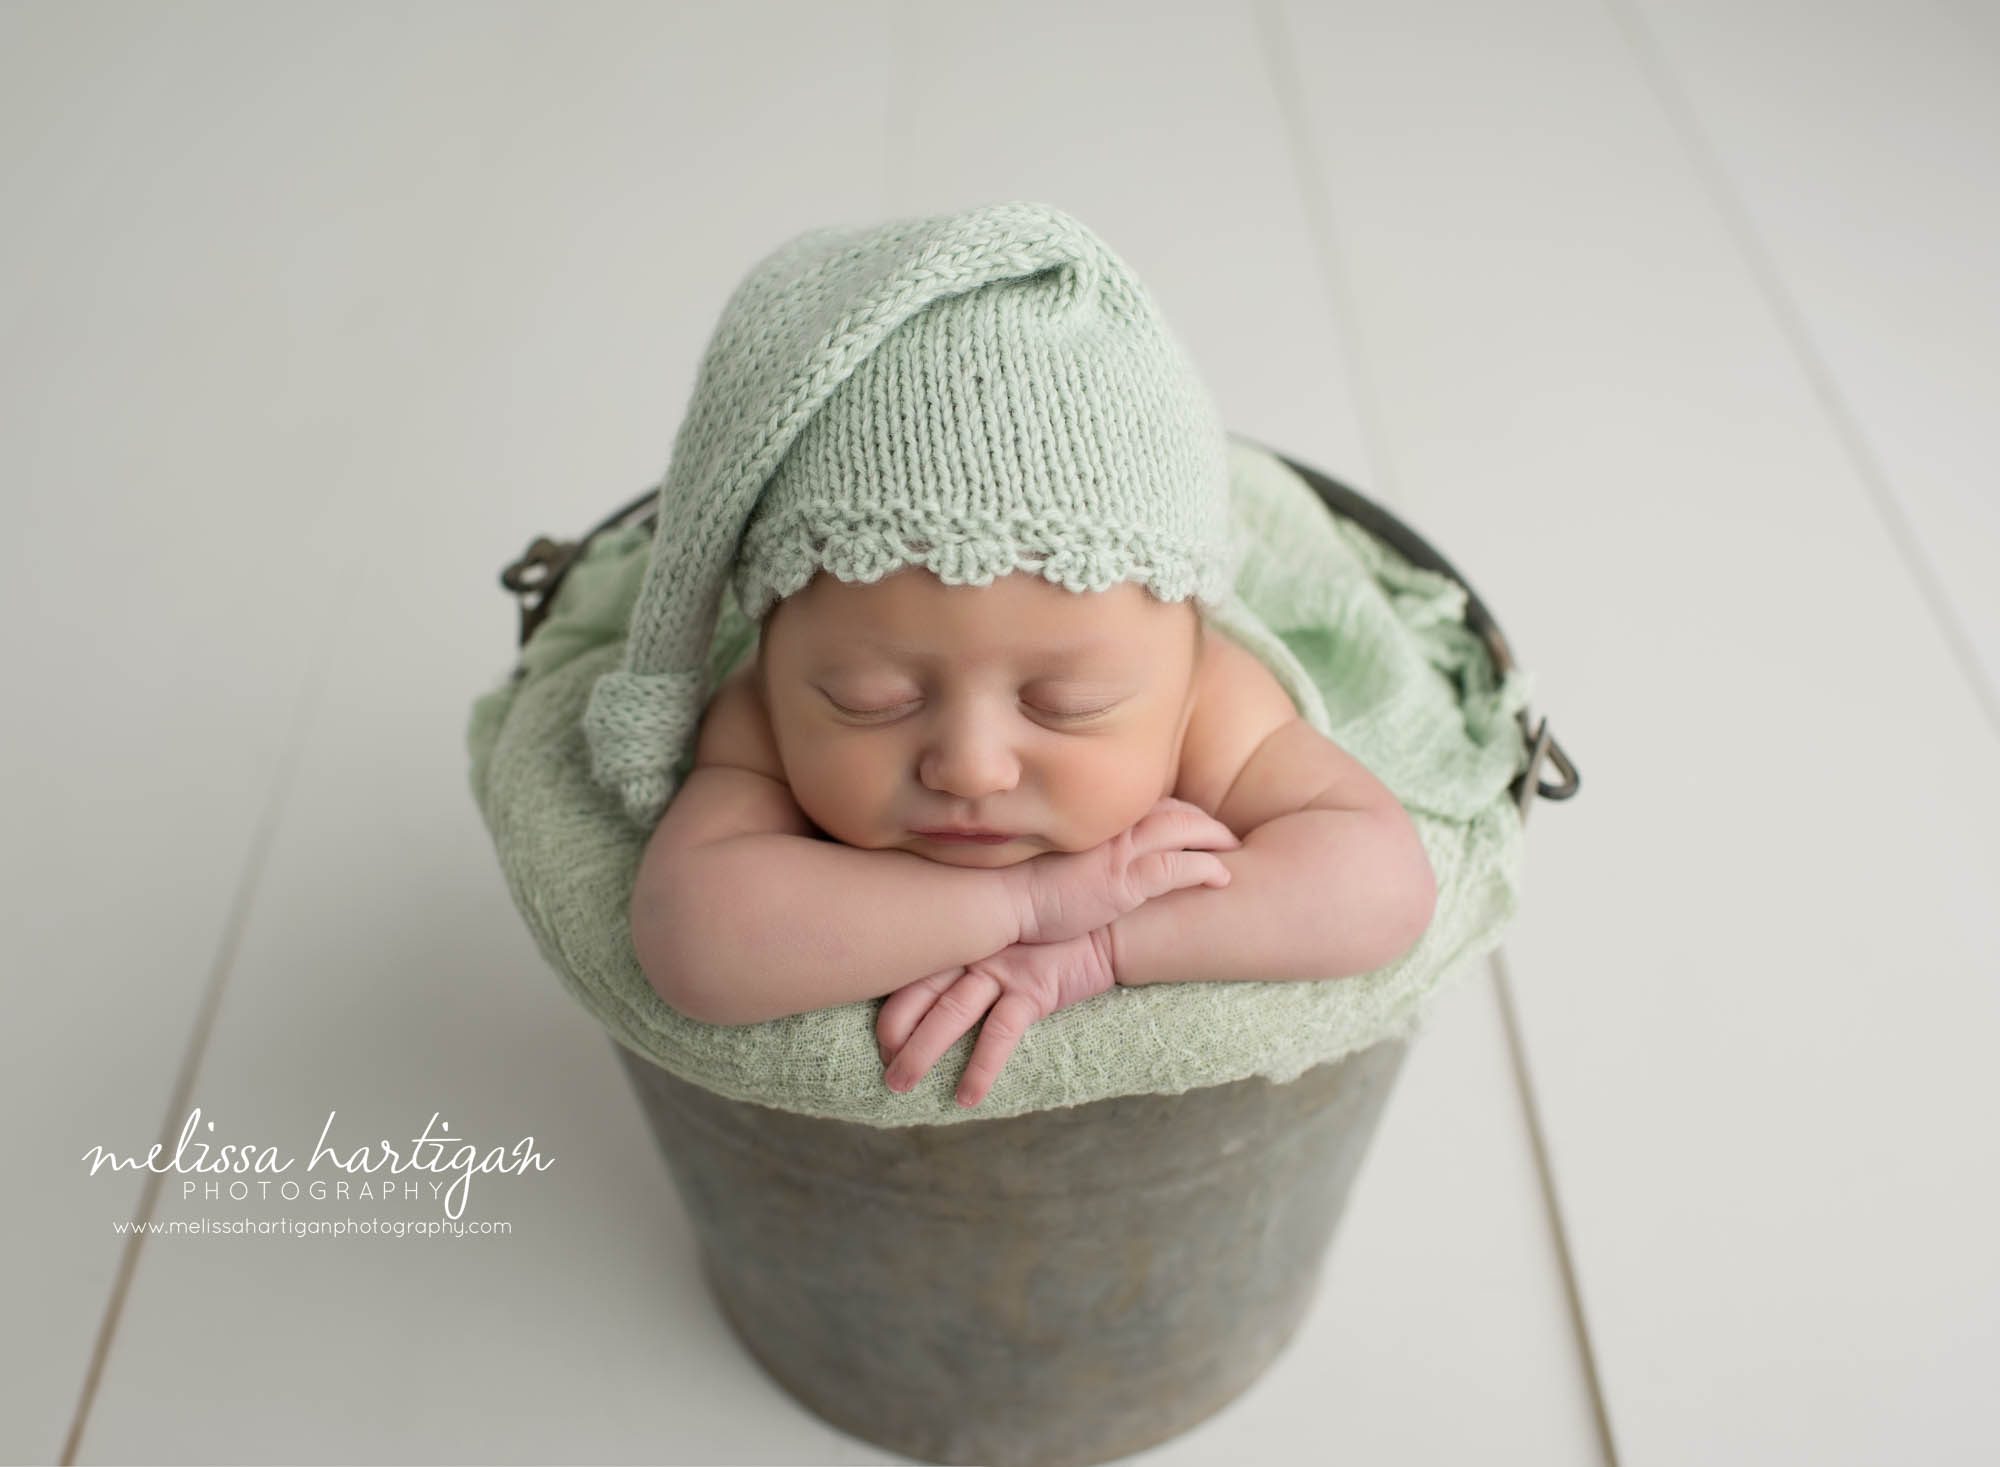 Leila CT Newborn Session baby girl sleeping in metal bucket with green blanket and hat